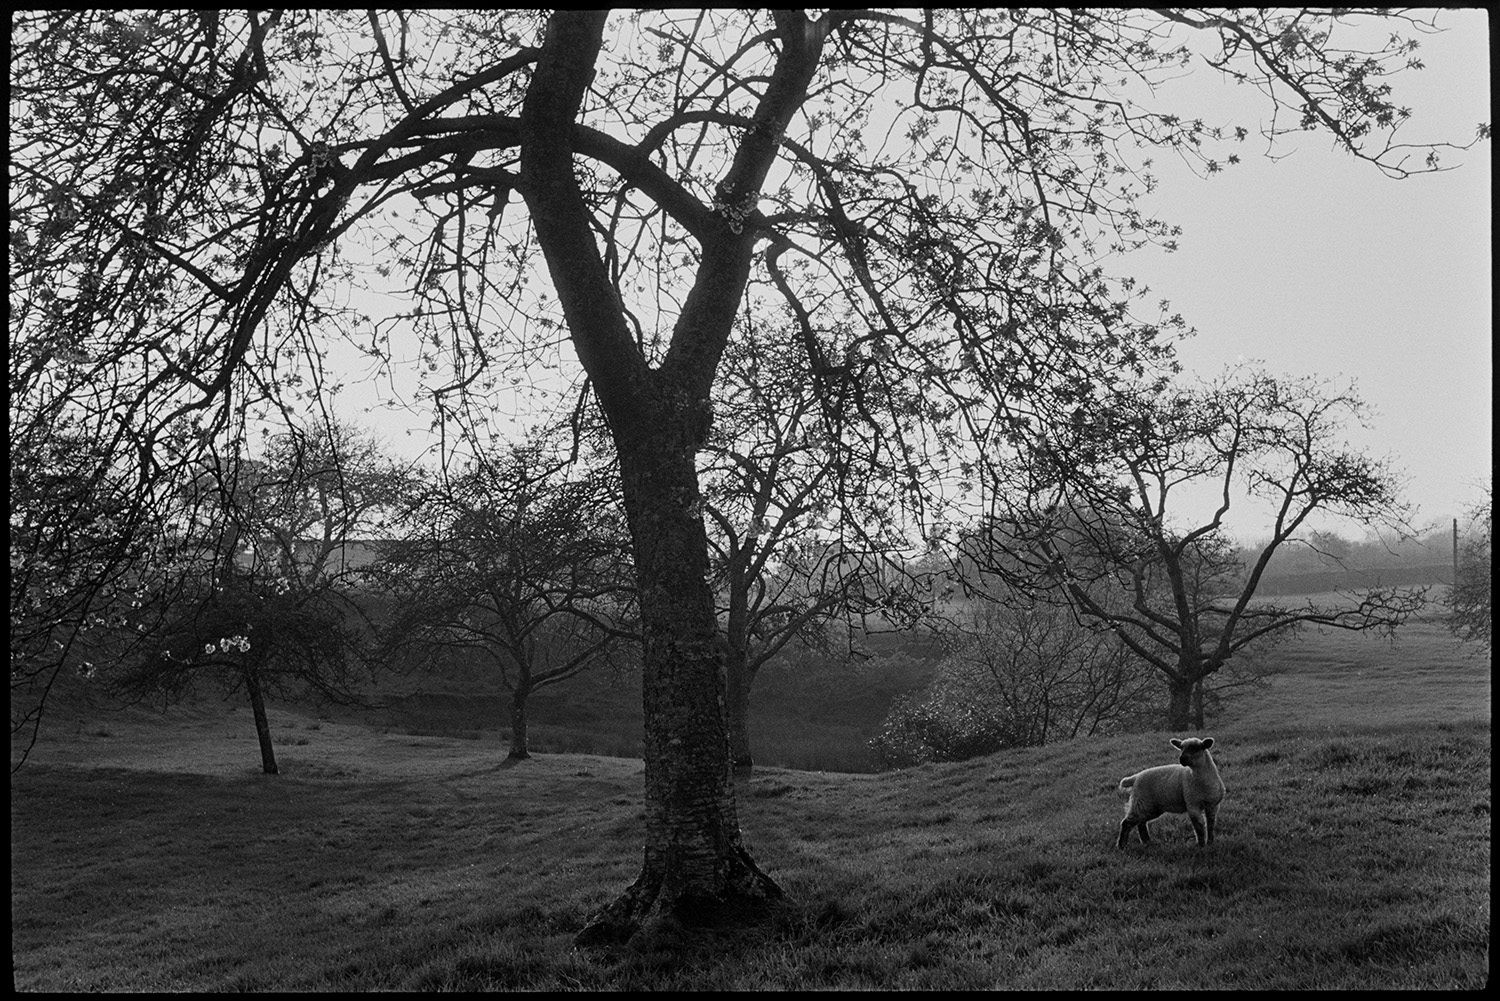 Orchards. Mazzard cherry trees in blossom,
[A sheep in an old orchard of mazzard cherry trees in blossom at Harford, Landkey